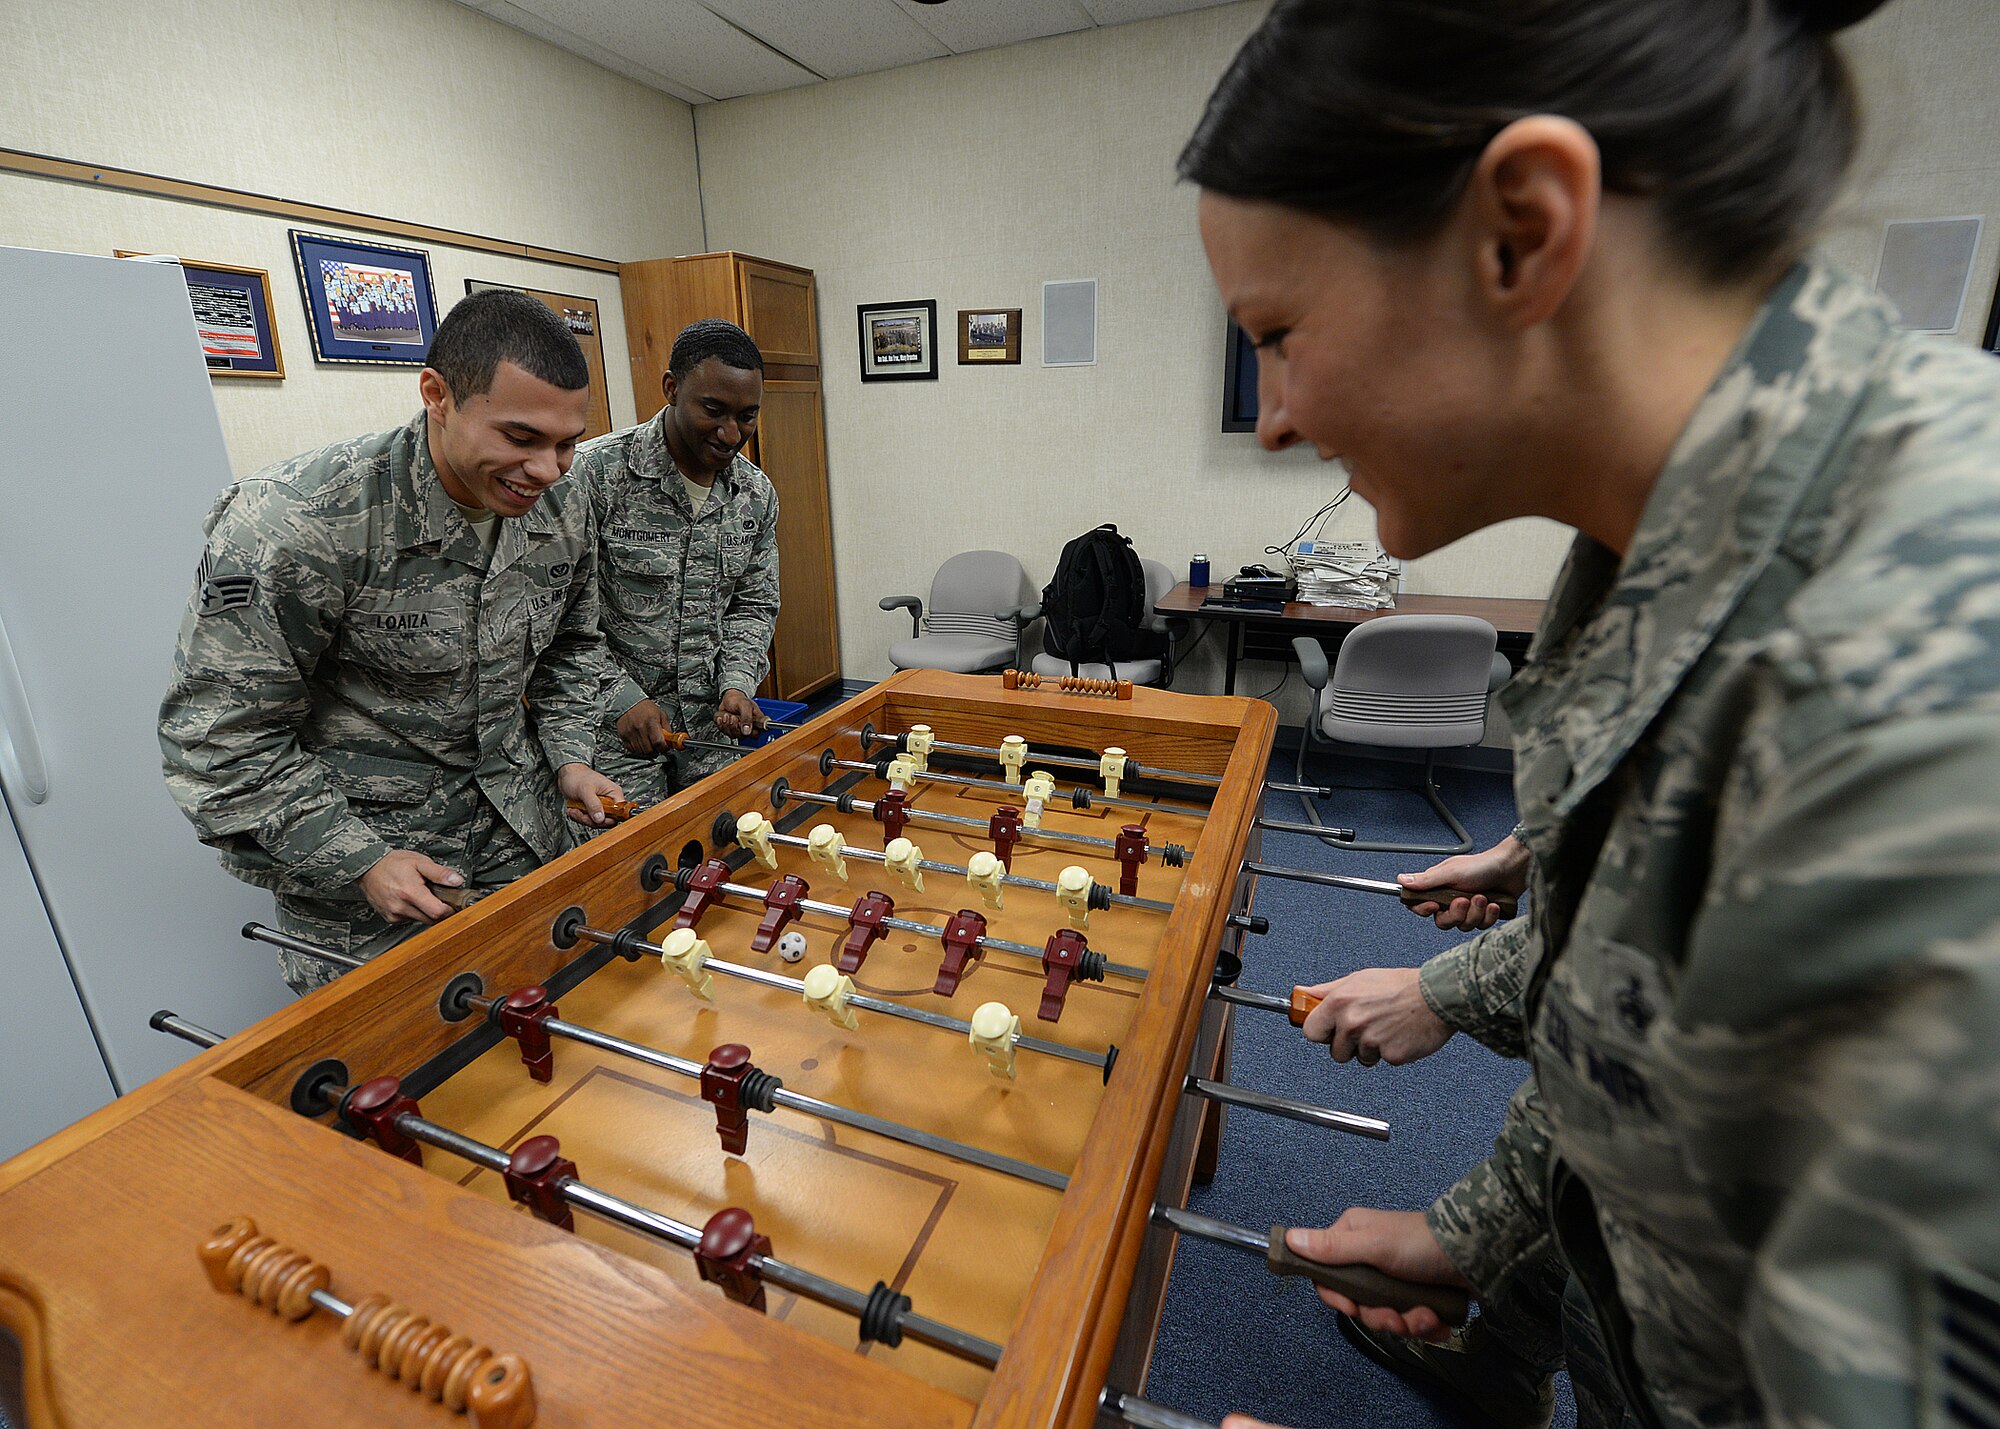 ALTUS AIR FORCE BASE, Okla. – Airman Leadership School instructors and students play foosball after a lecture in the Airman Leadership School break room Jan. 28, 2014. The instructors and students use their leisure time playing foosball and ping pong after long sessions of class work. (U.S. Air Force photo by Senior Airman Levin Boland/Released)